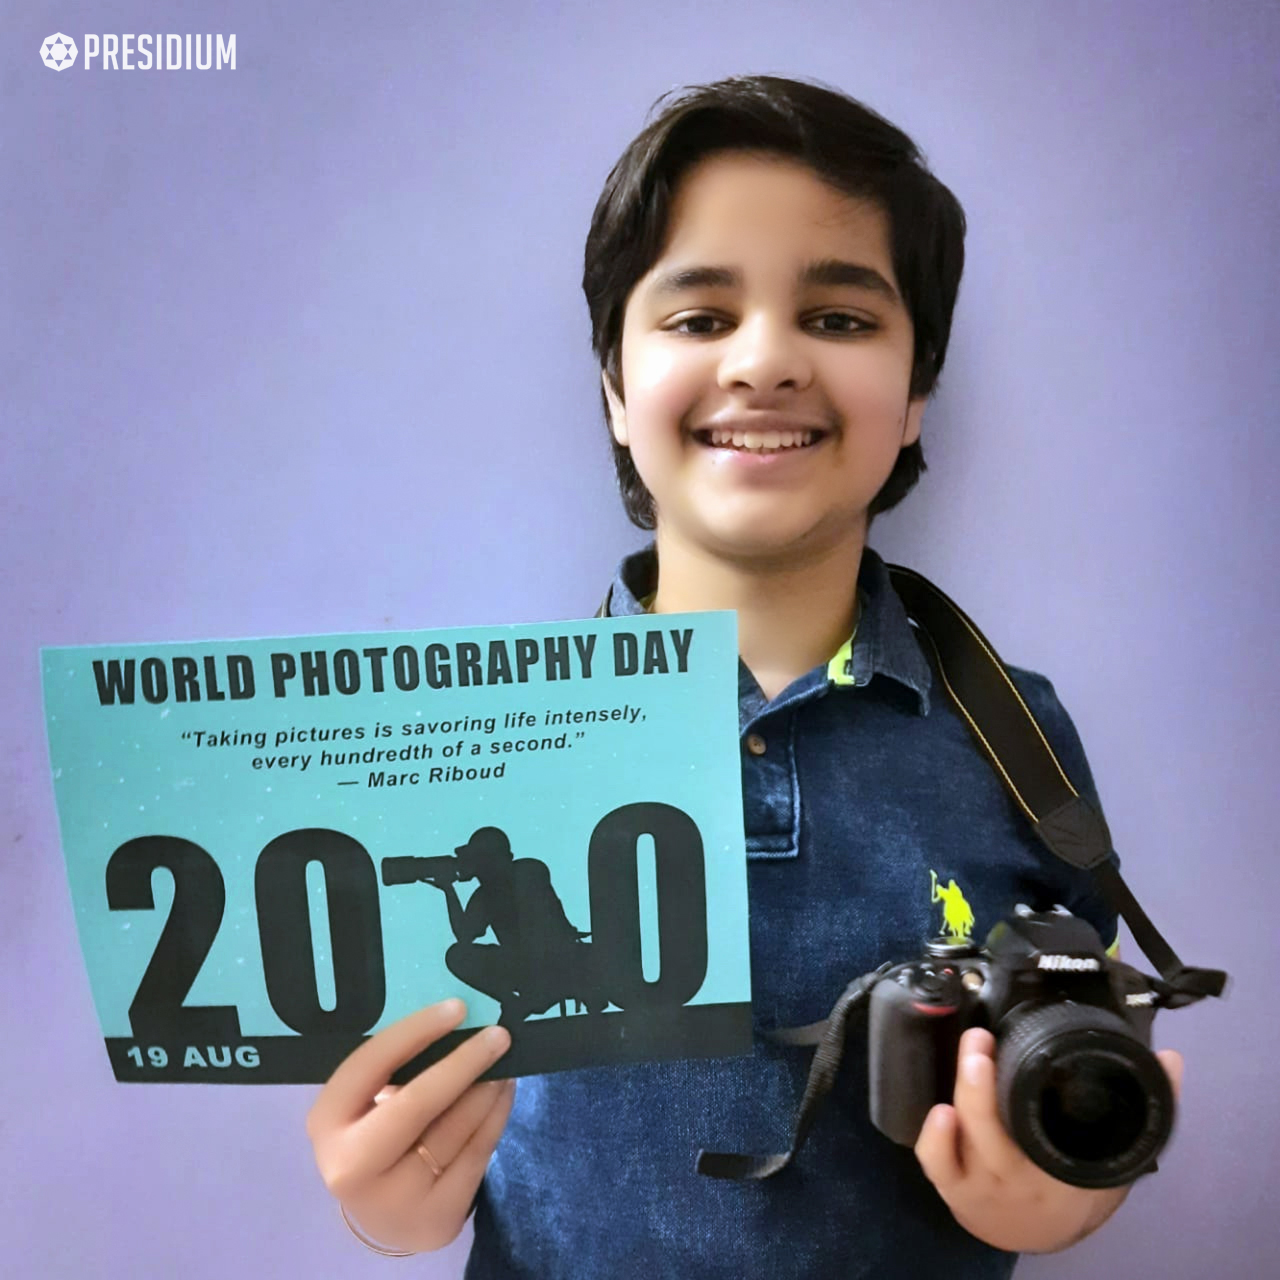 WORLD PHOTOGRAPHY DAY 2020